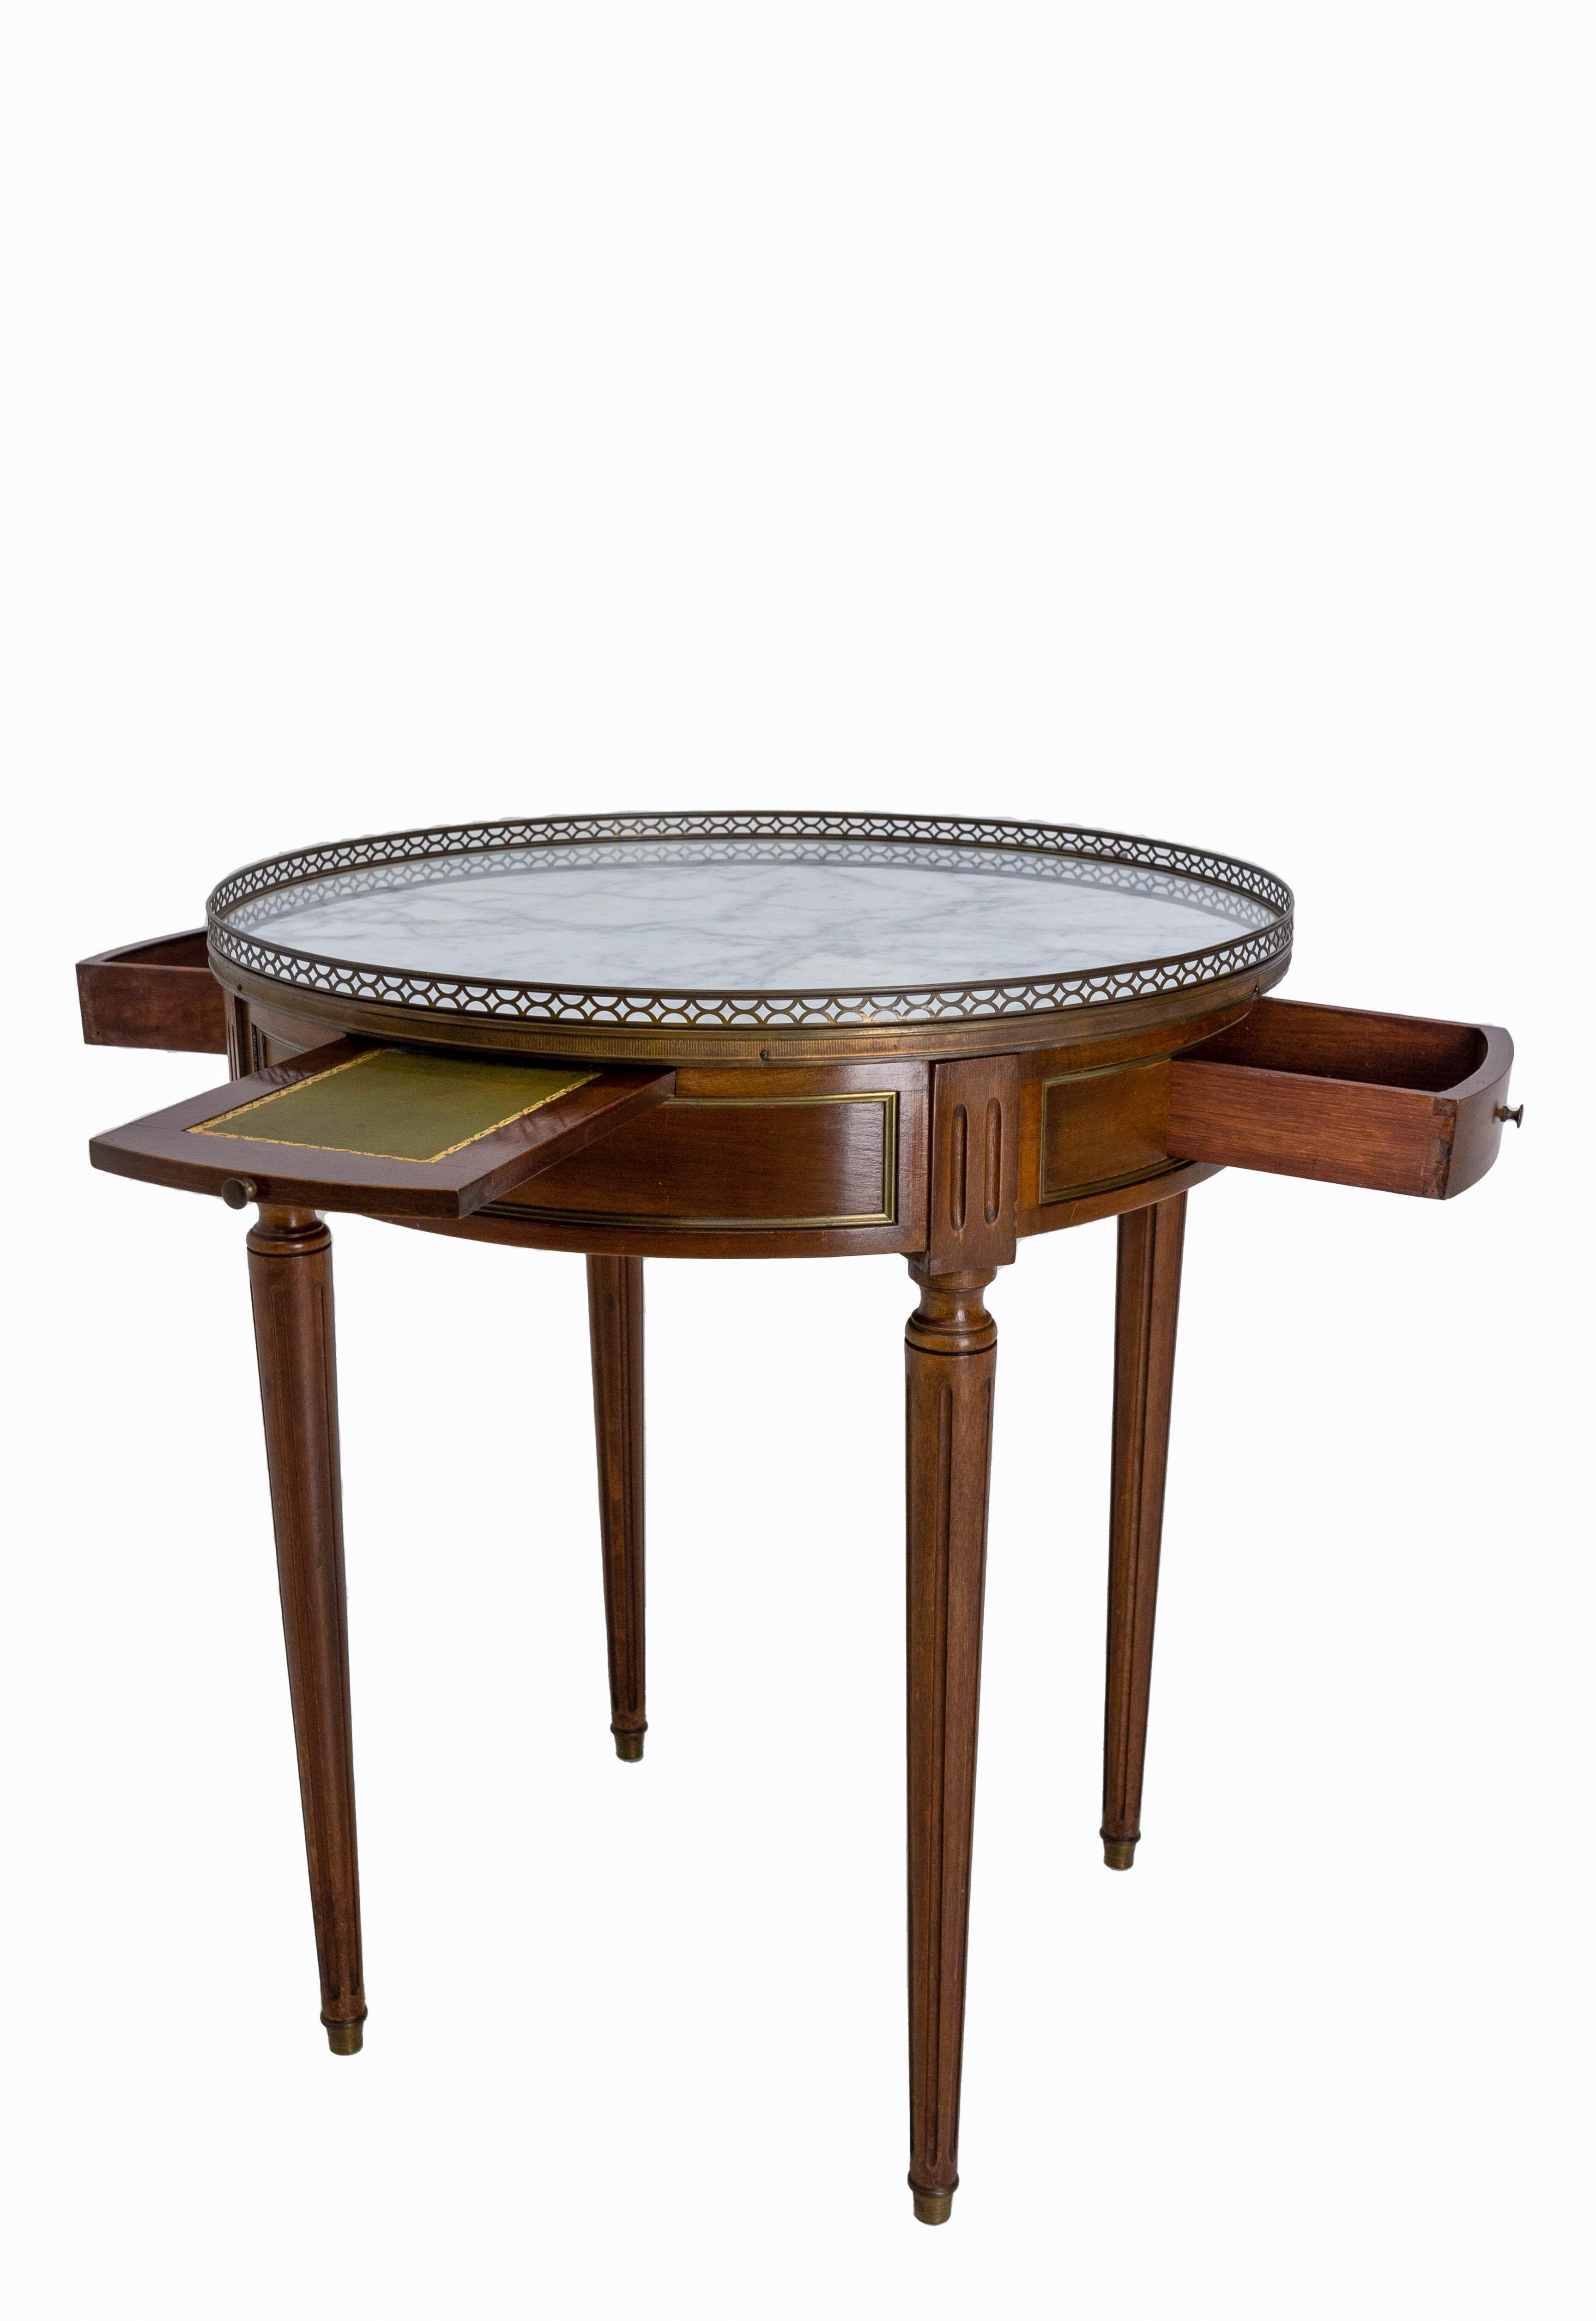 20th Century Louis XVI Style Bouillotte Table Brass Marble Leather and Walnut French, c. 1960